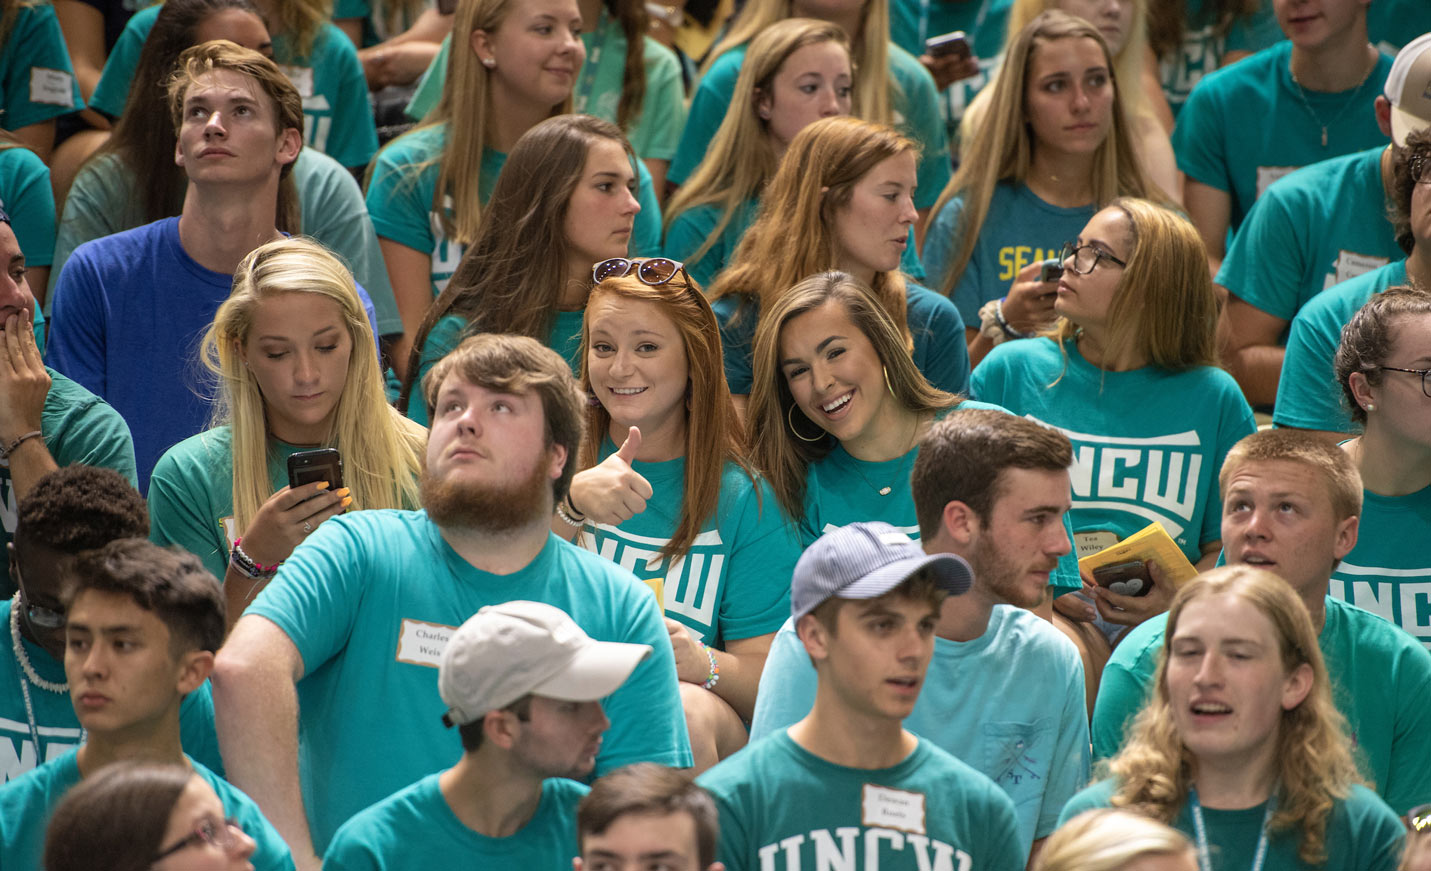 Students convene in Trask Coliseum for convocation, which officially kicks off the school year.